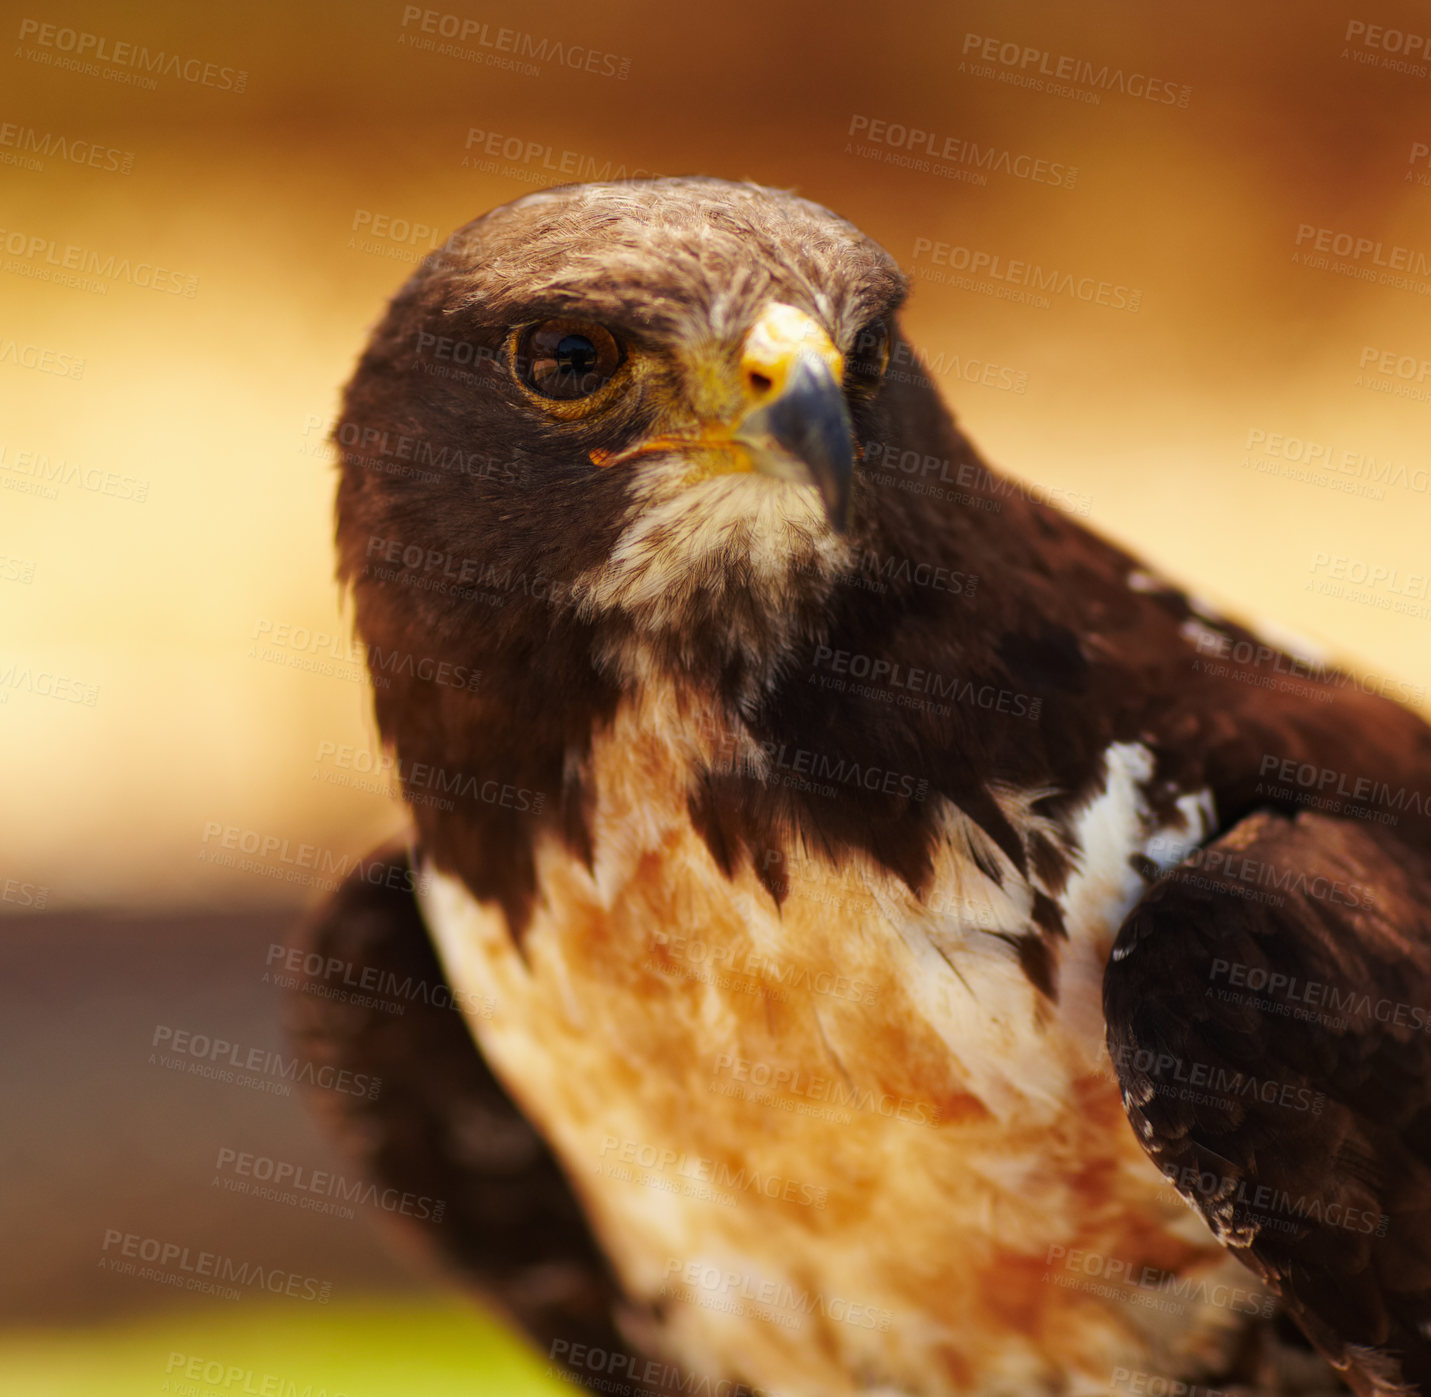 Buy stock photo Closeup portrait of majestic bird of prey. Strong red tailed hawk with its sharp, eagle like whistle symbolises miracles, strength and clarity.  Waiting patiently for a mammal to become its next meal